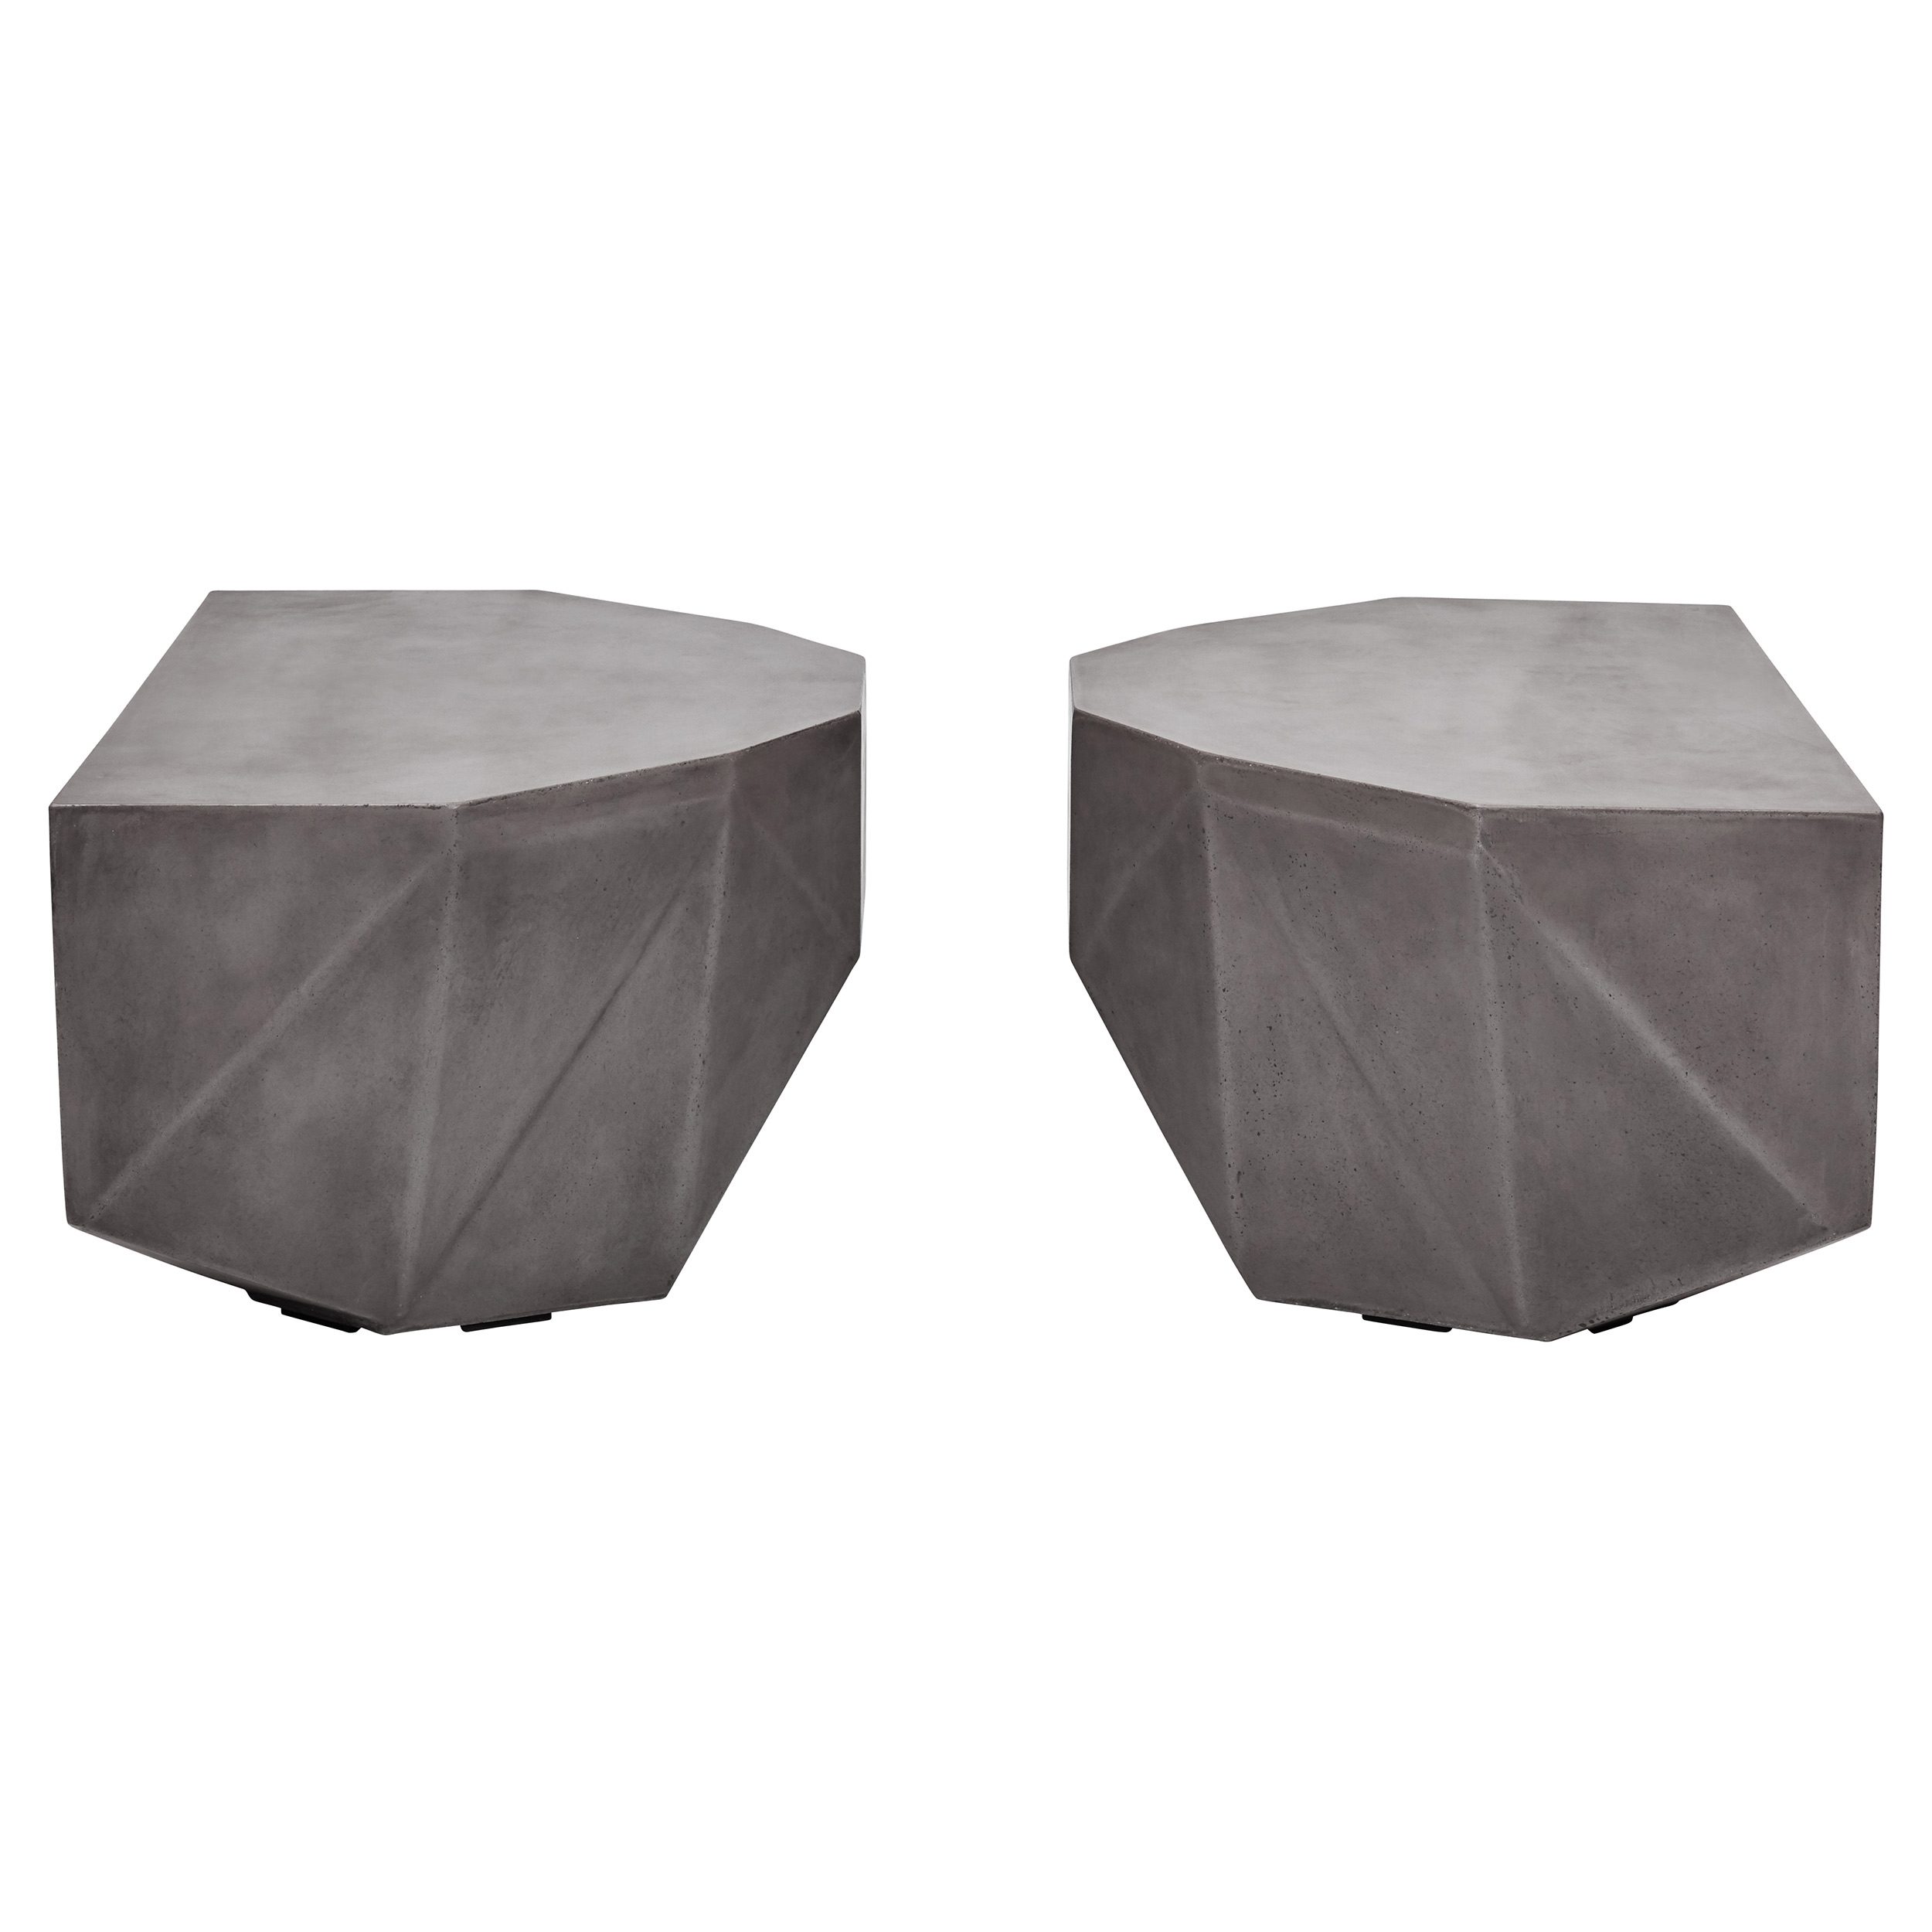 Lily Modern Classic Dark Grey Geometric Outdoor Coffee Table - Set of 2 - Image 5